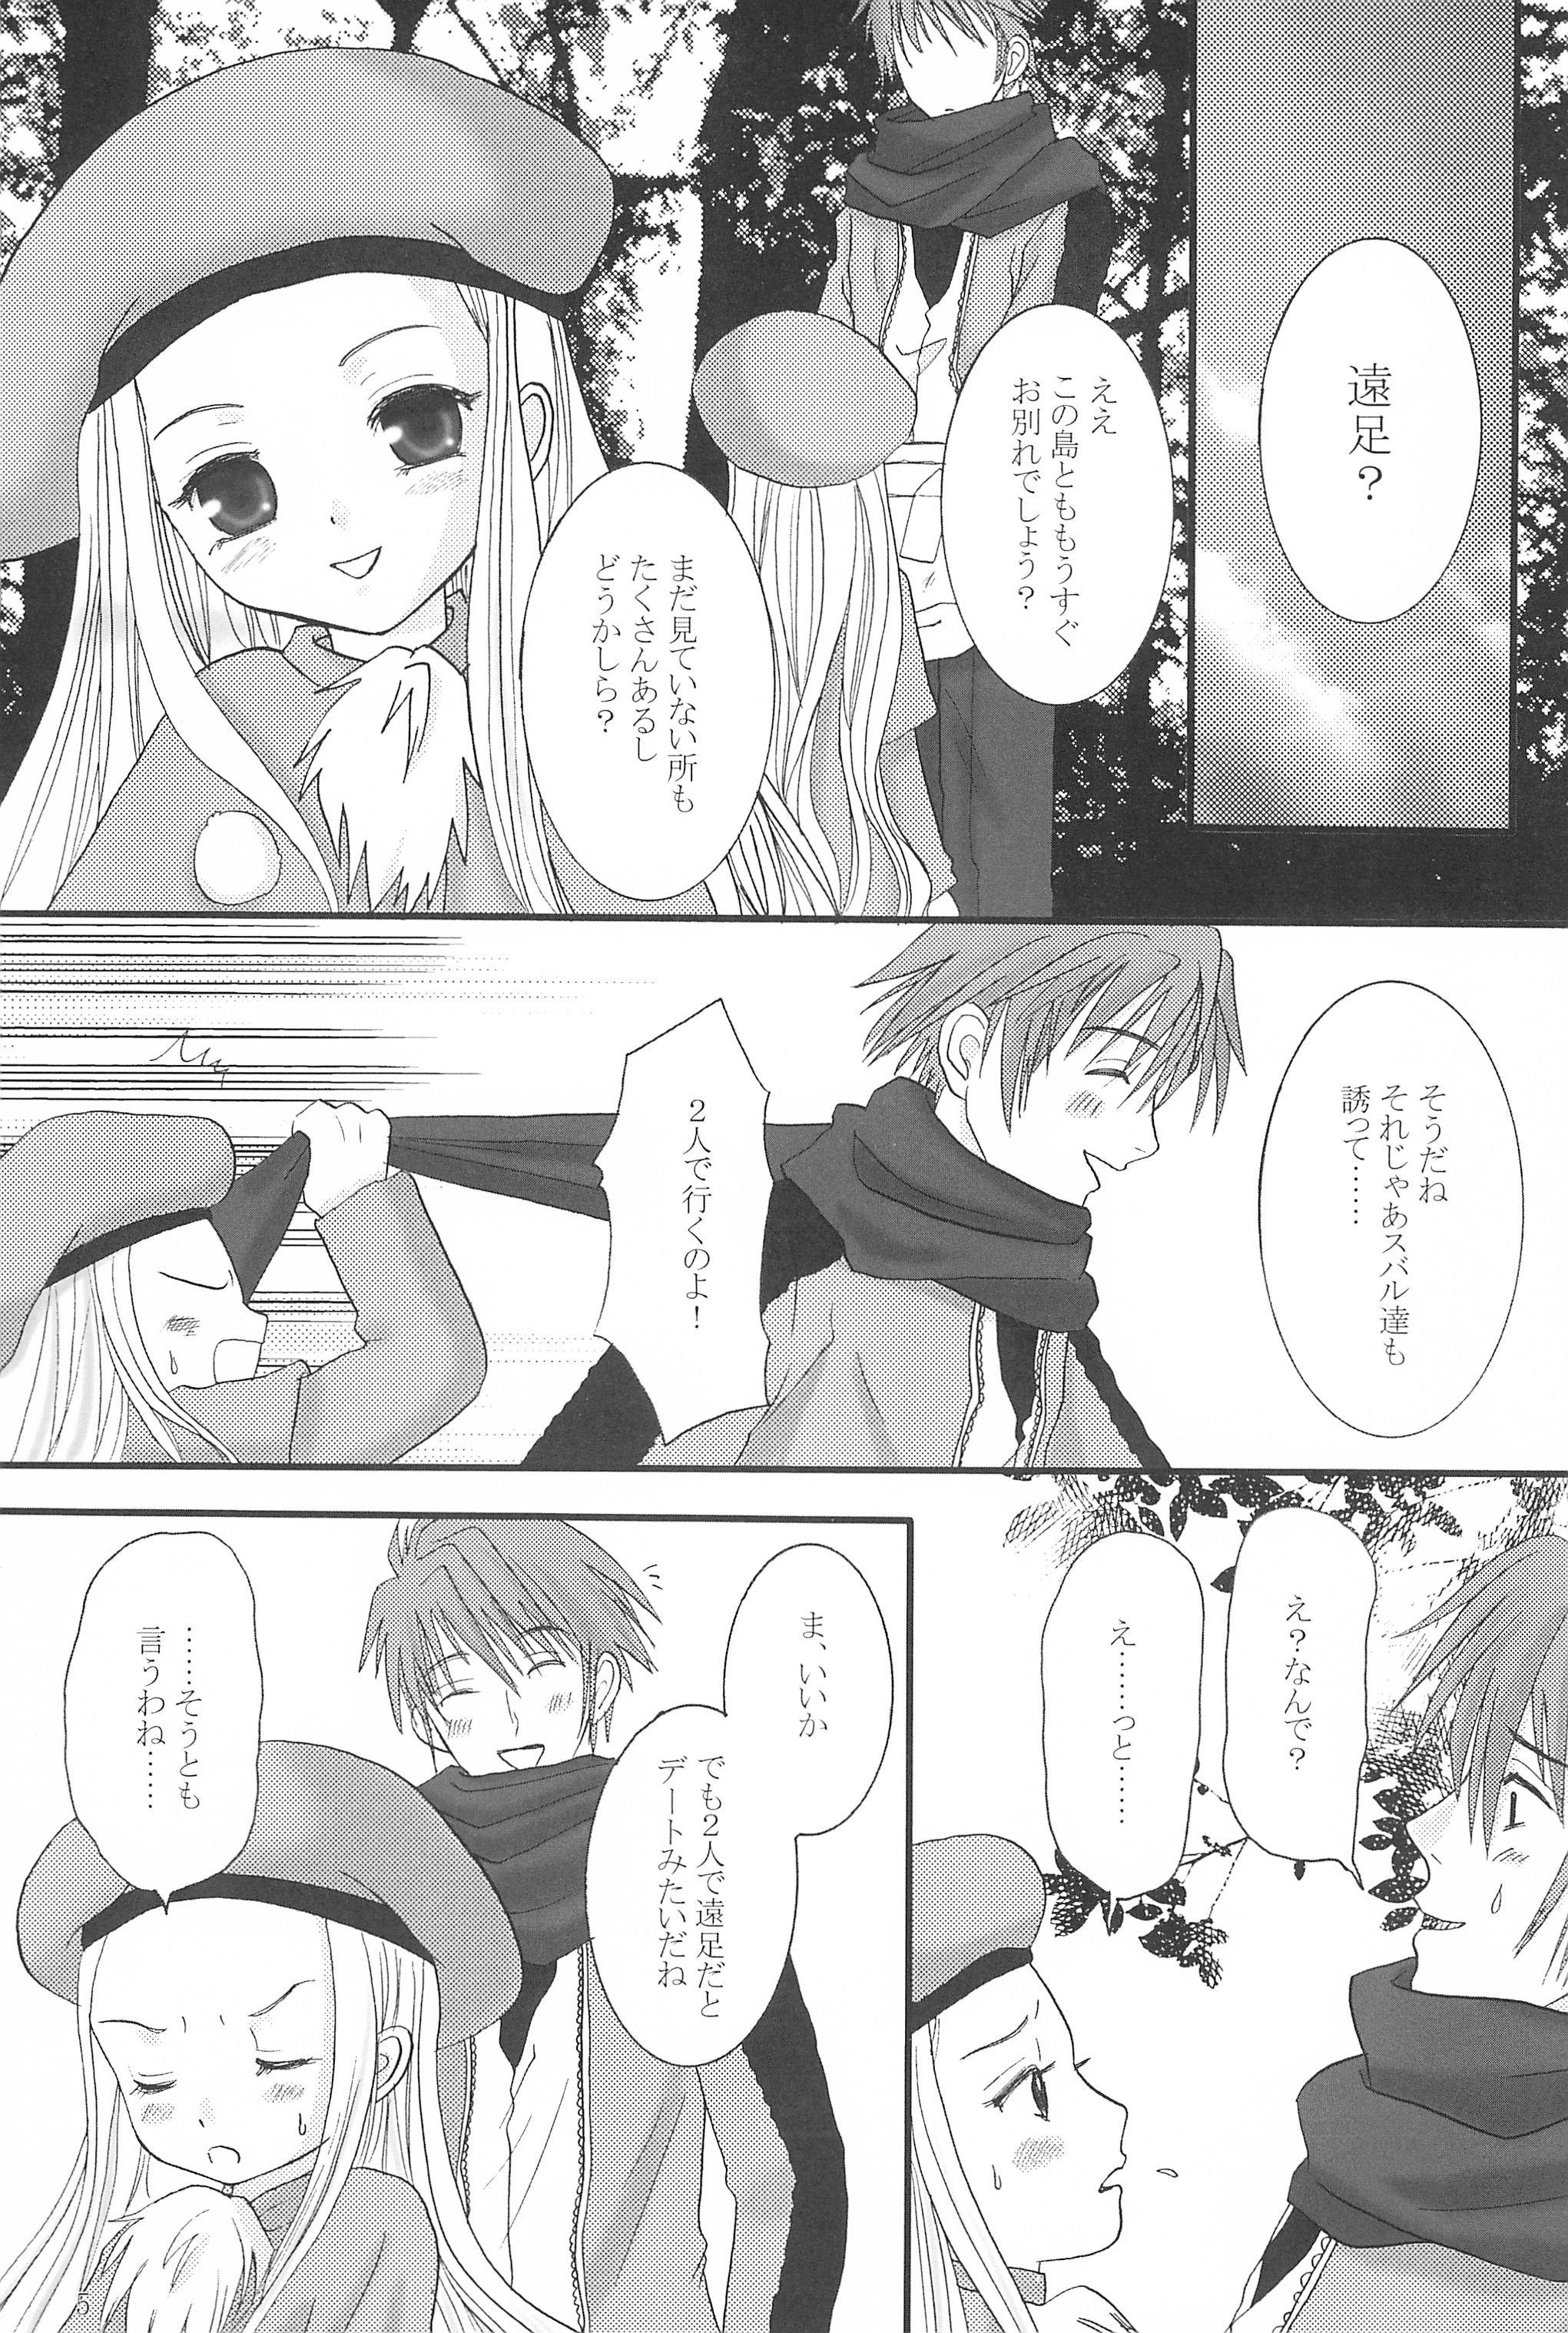 Hair MY SWEET STRAWBERRY - Summon night Fucked - Page 5